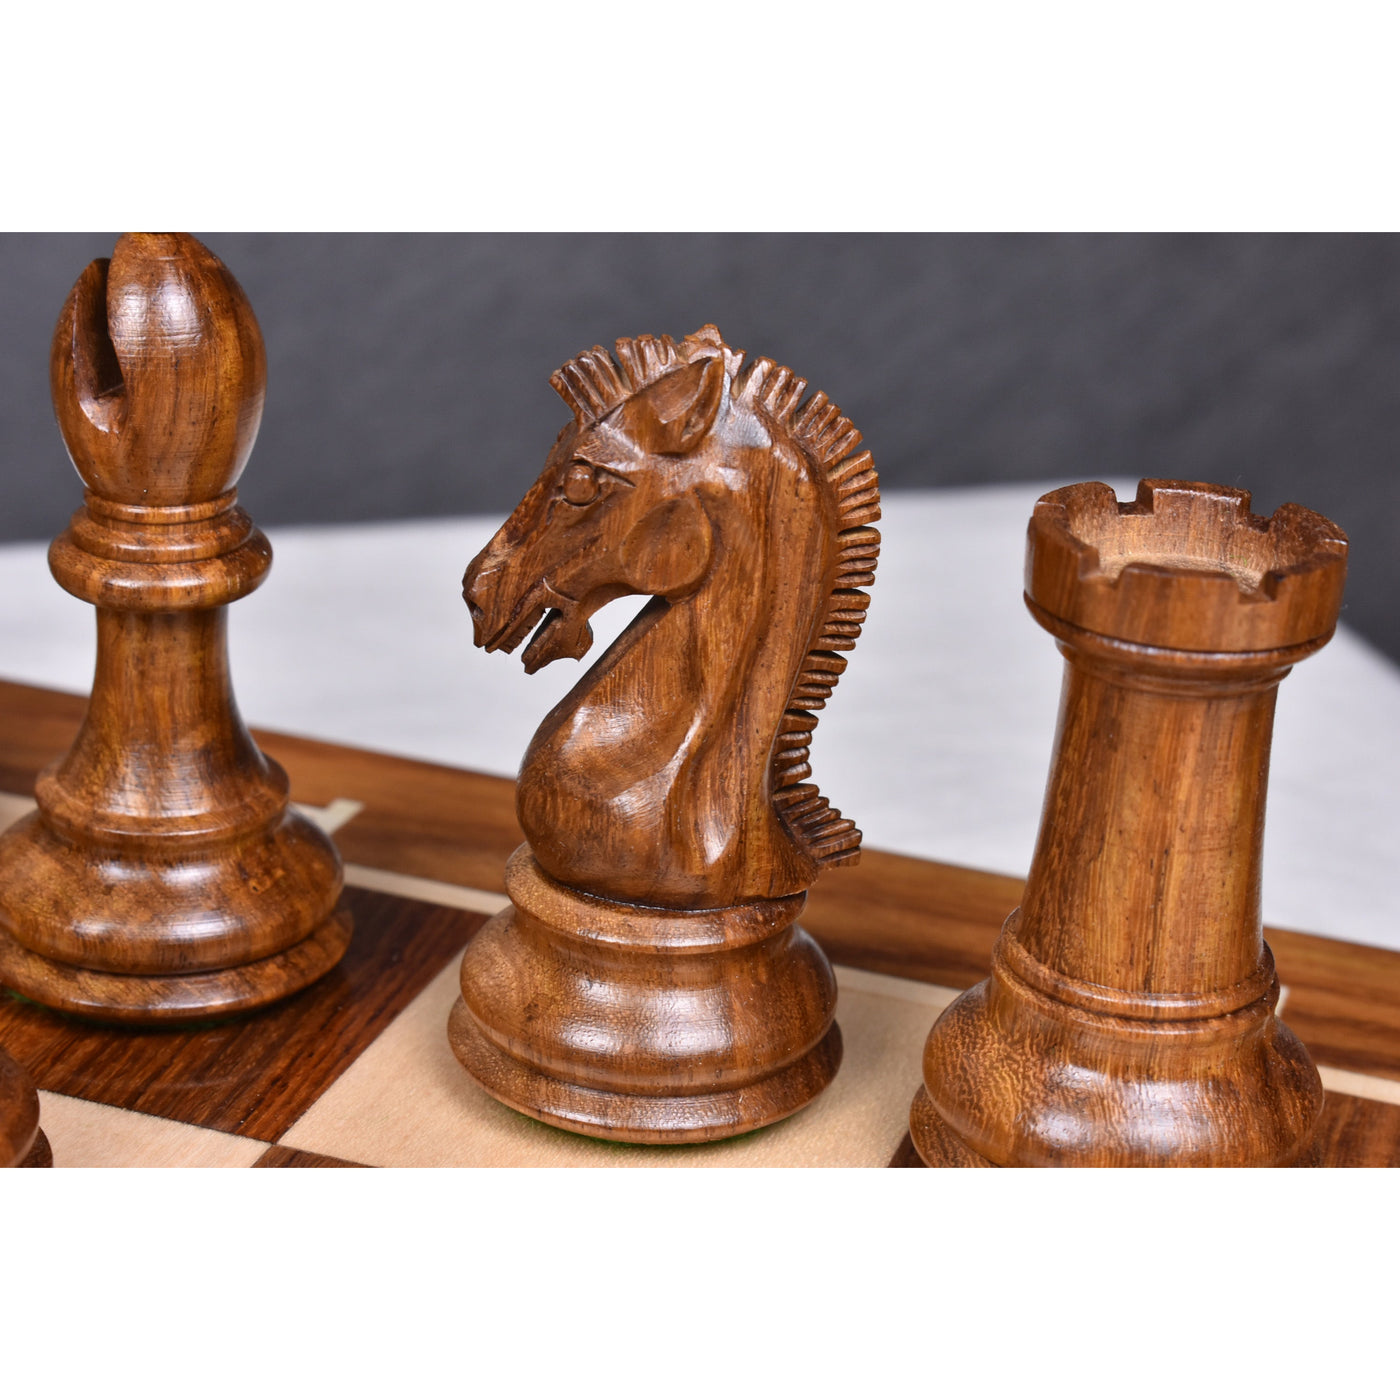 Slightly Imperfect 3.9" Craftsman Knight Staunton Chess Set - Chess Pieces Only - Triple Weighted Golden Rosewood